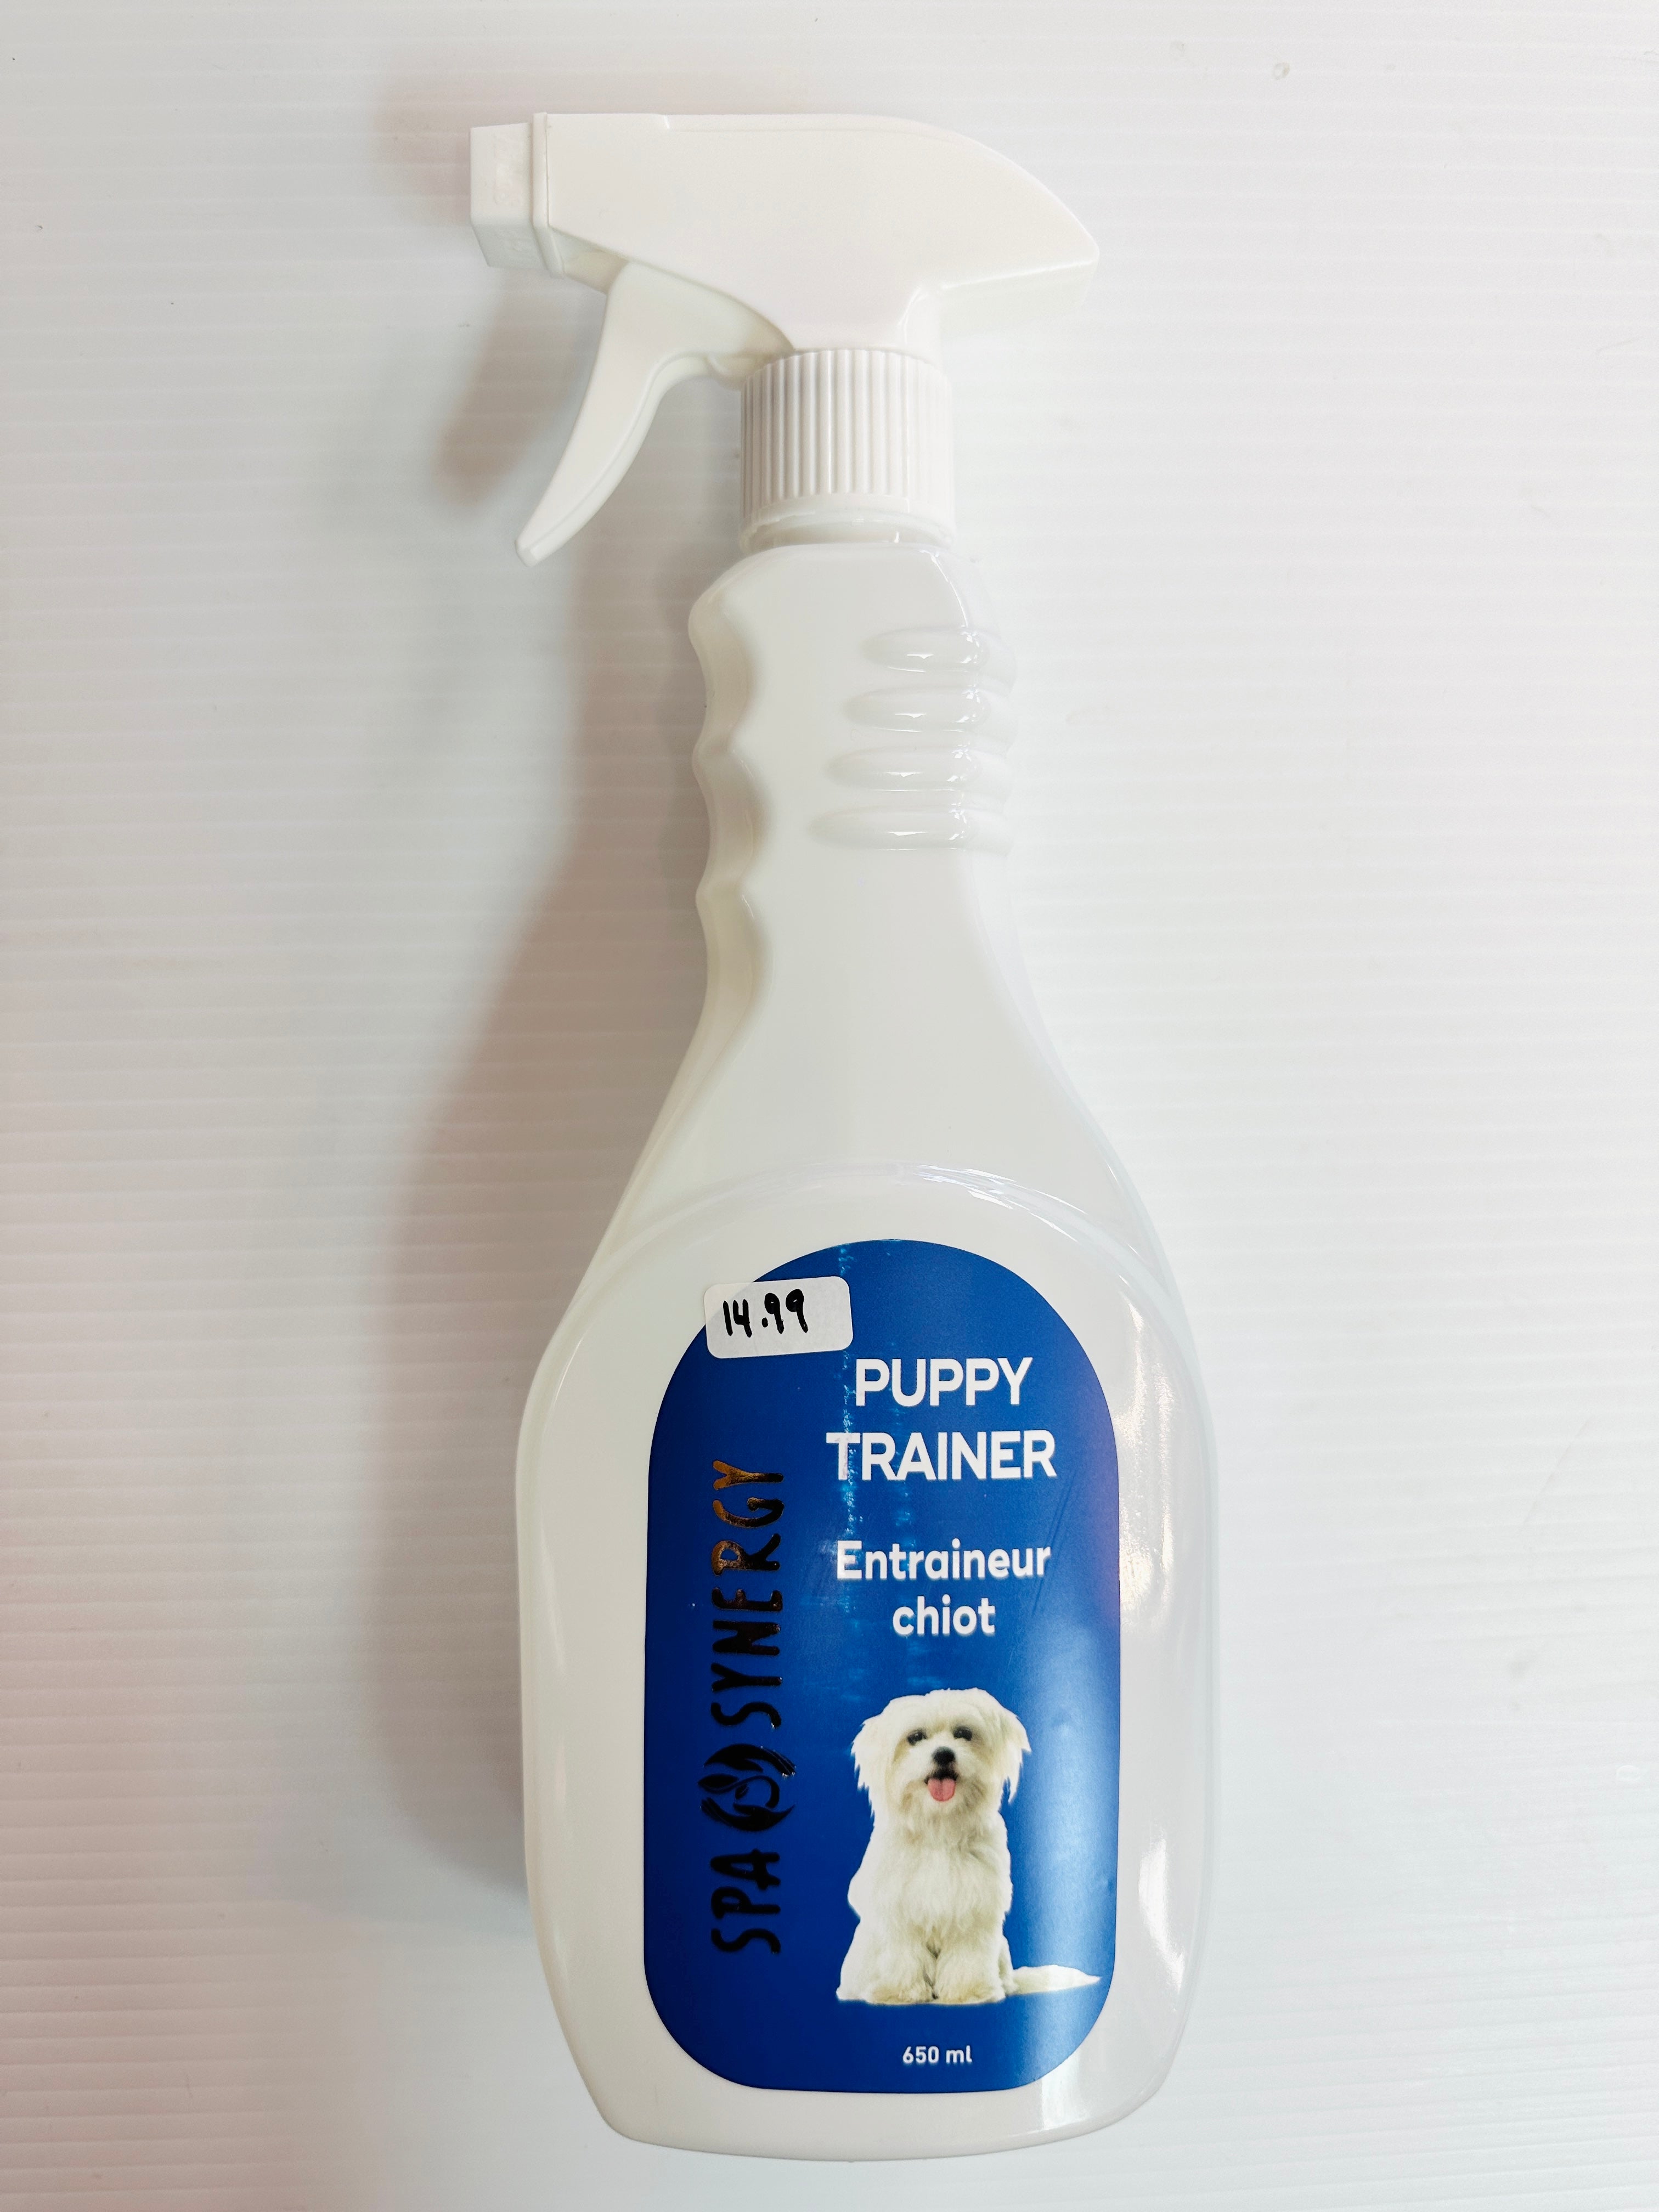 Spa Synergy Puppy Trainer (610ml)